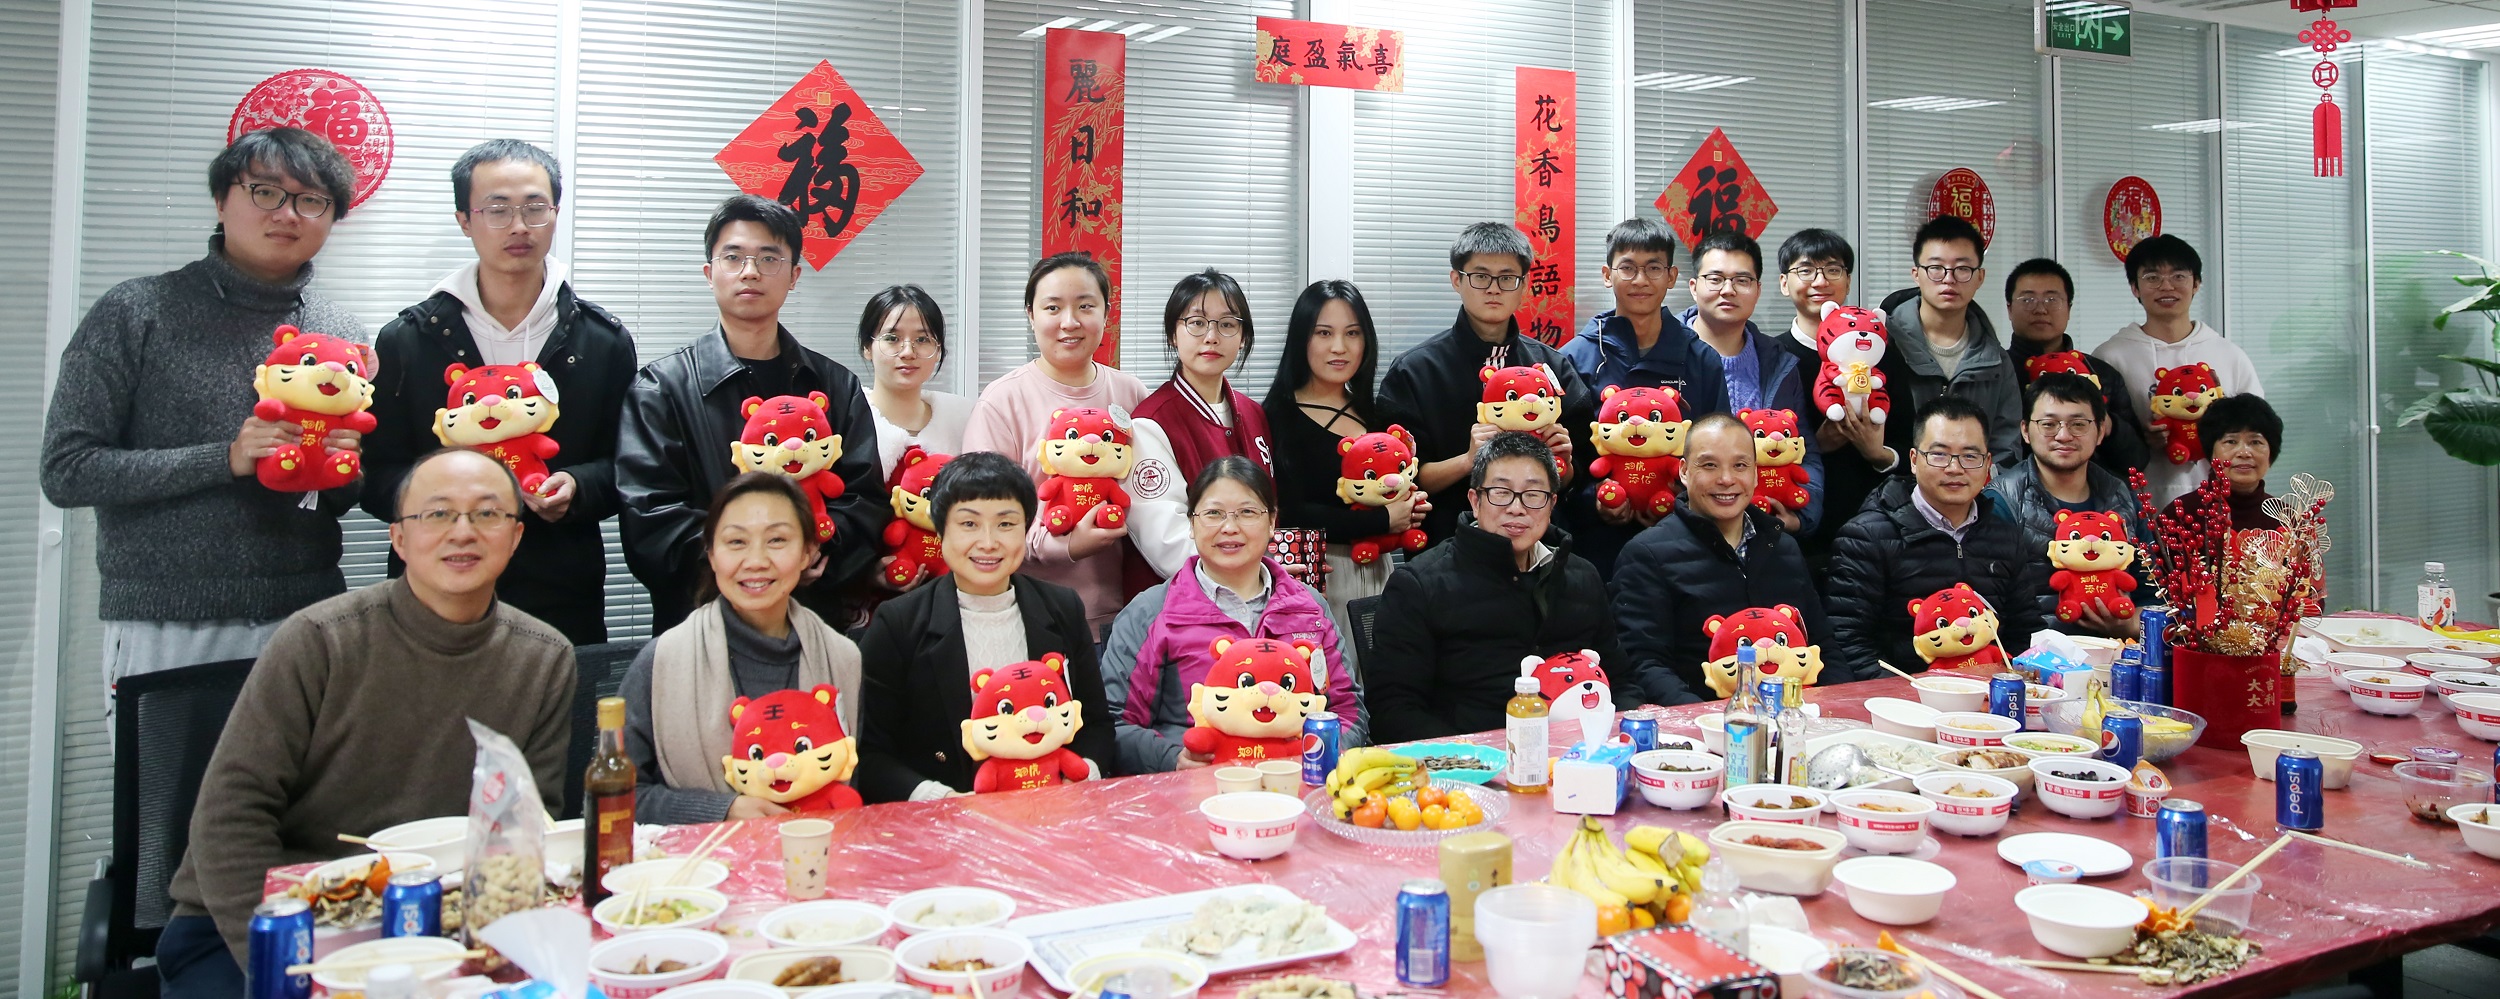 SIO extended New Year greetings to postgraduates who stayed in Hangzhou during winter vacation